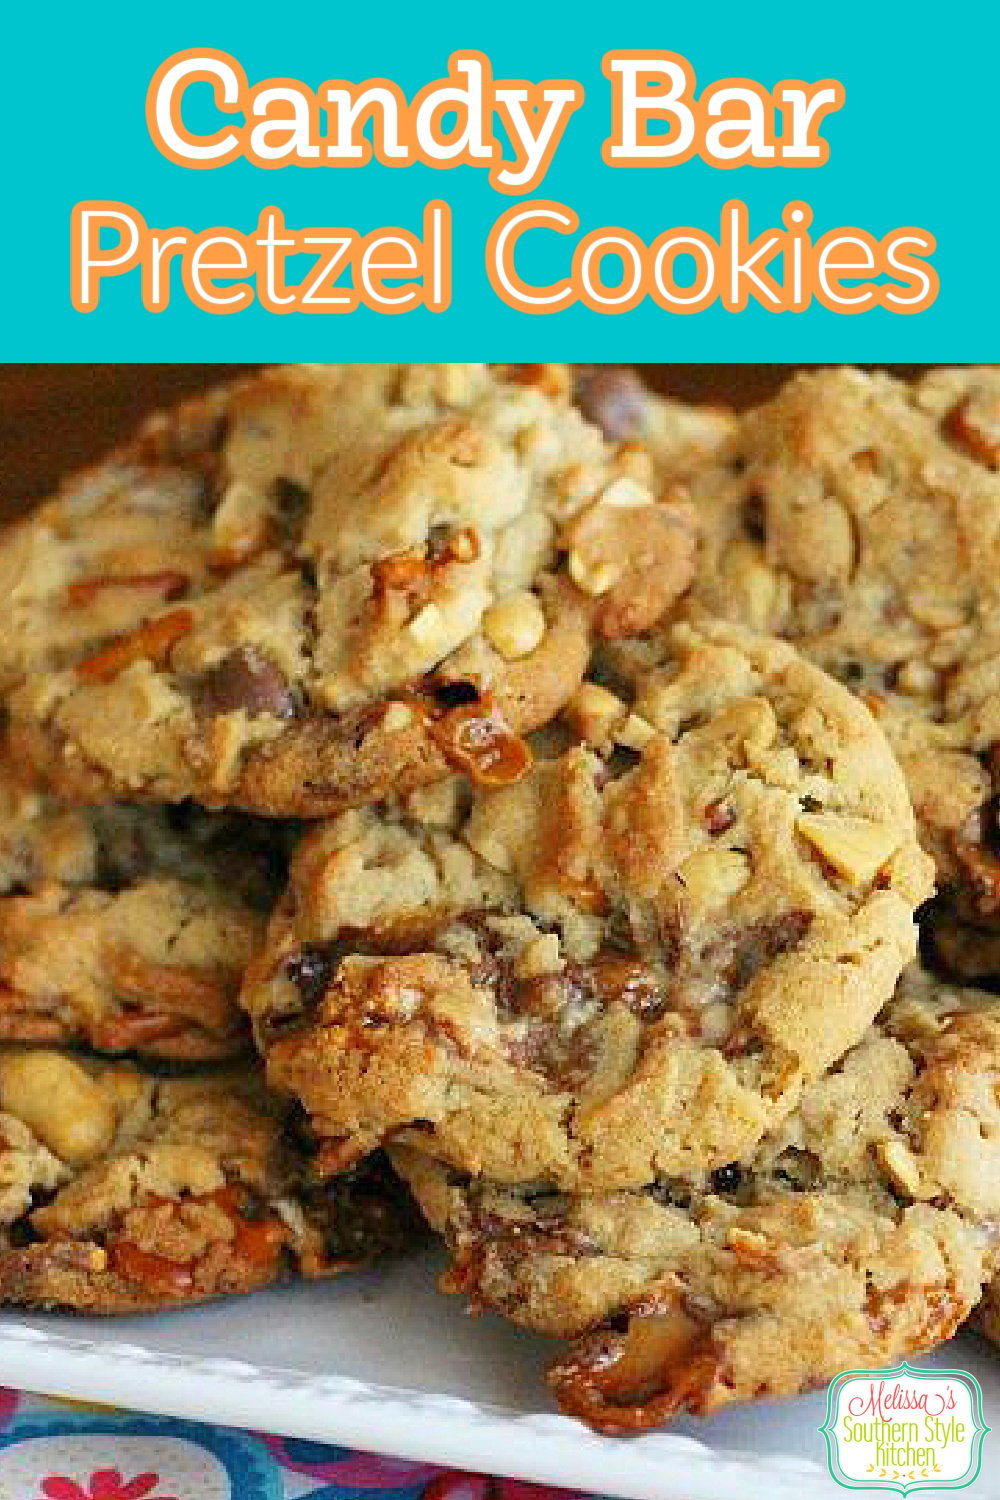 These sweet and salty Candy Bar Pretzel Cookies won't last long in your cookie jar! #candybarcookies #candybarpretzelcookies #cookies #cookierecipes #christmascookies #pretzels #holidaybaking #cookiejar #candybars #desserts #dessertfoodrecipes #southernrecipes #southernfood #fallbaking